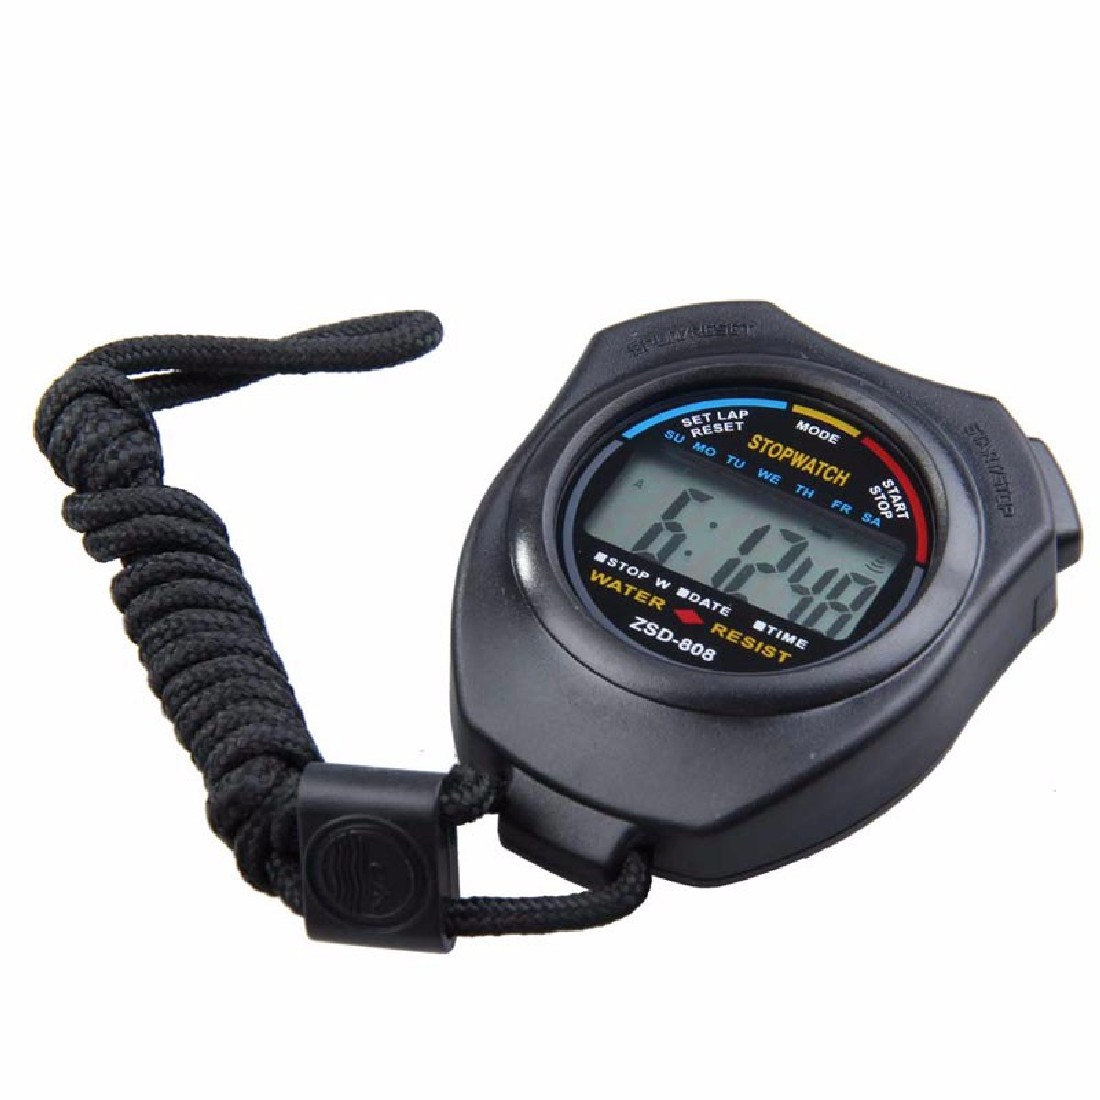 New 1pcs Hot Handheld Sports Stopwatch Timer Professional Digital LCD Sports Stopwatch Chronograph Counter Timers With Strap